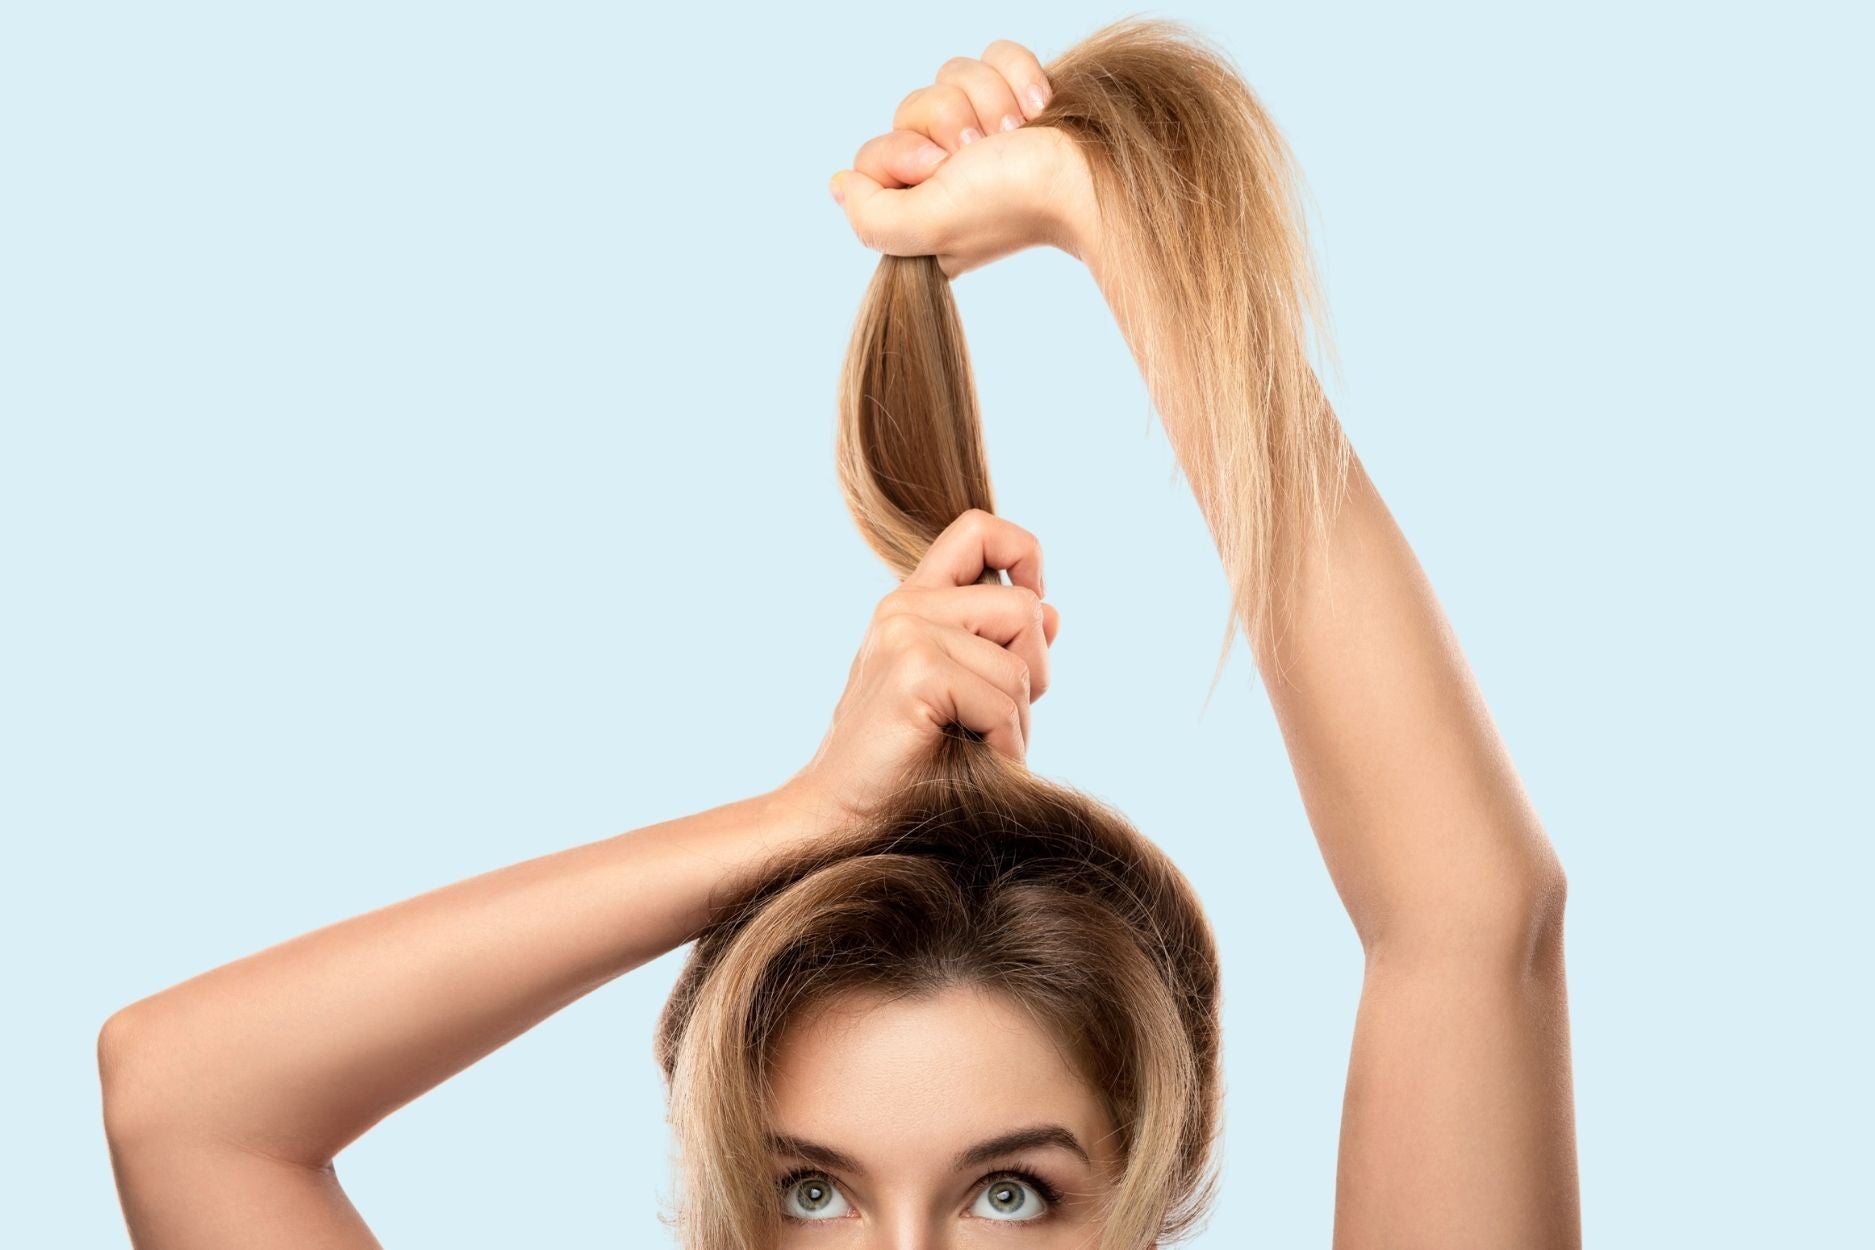 Hair loss: What causes it, and how to treat it